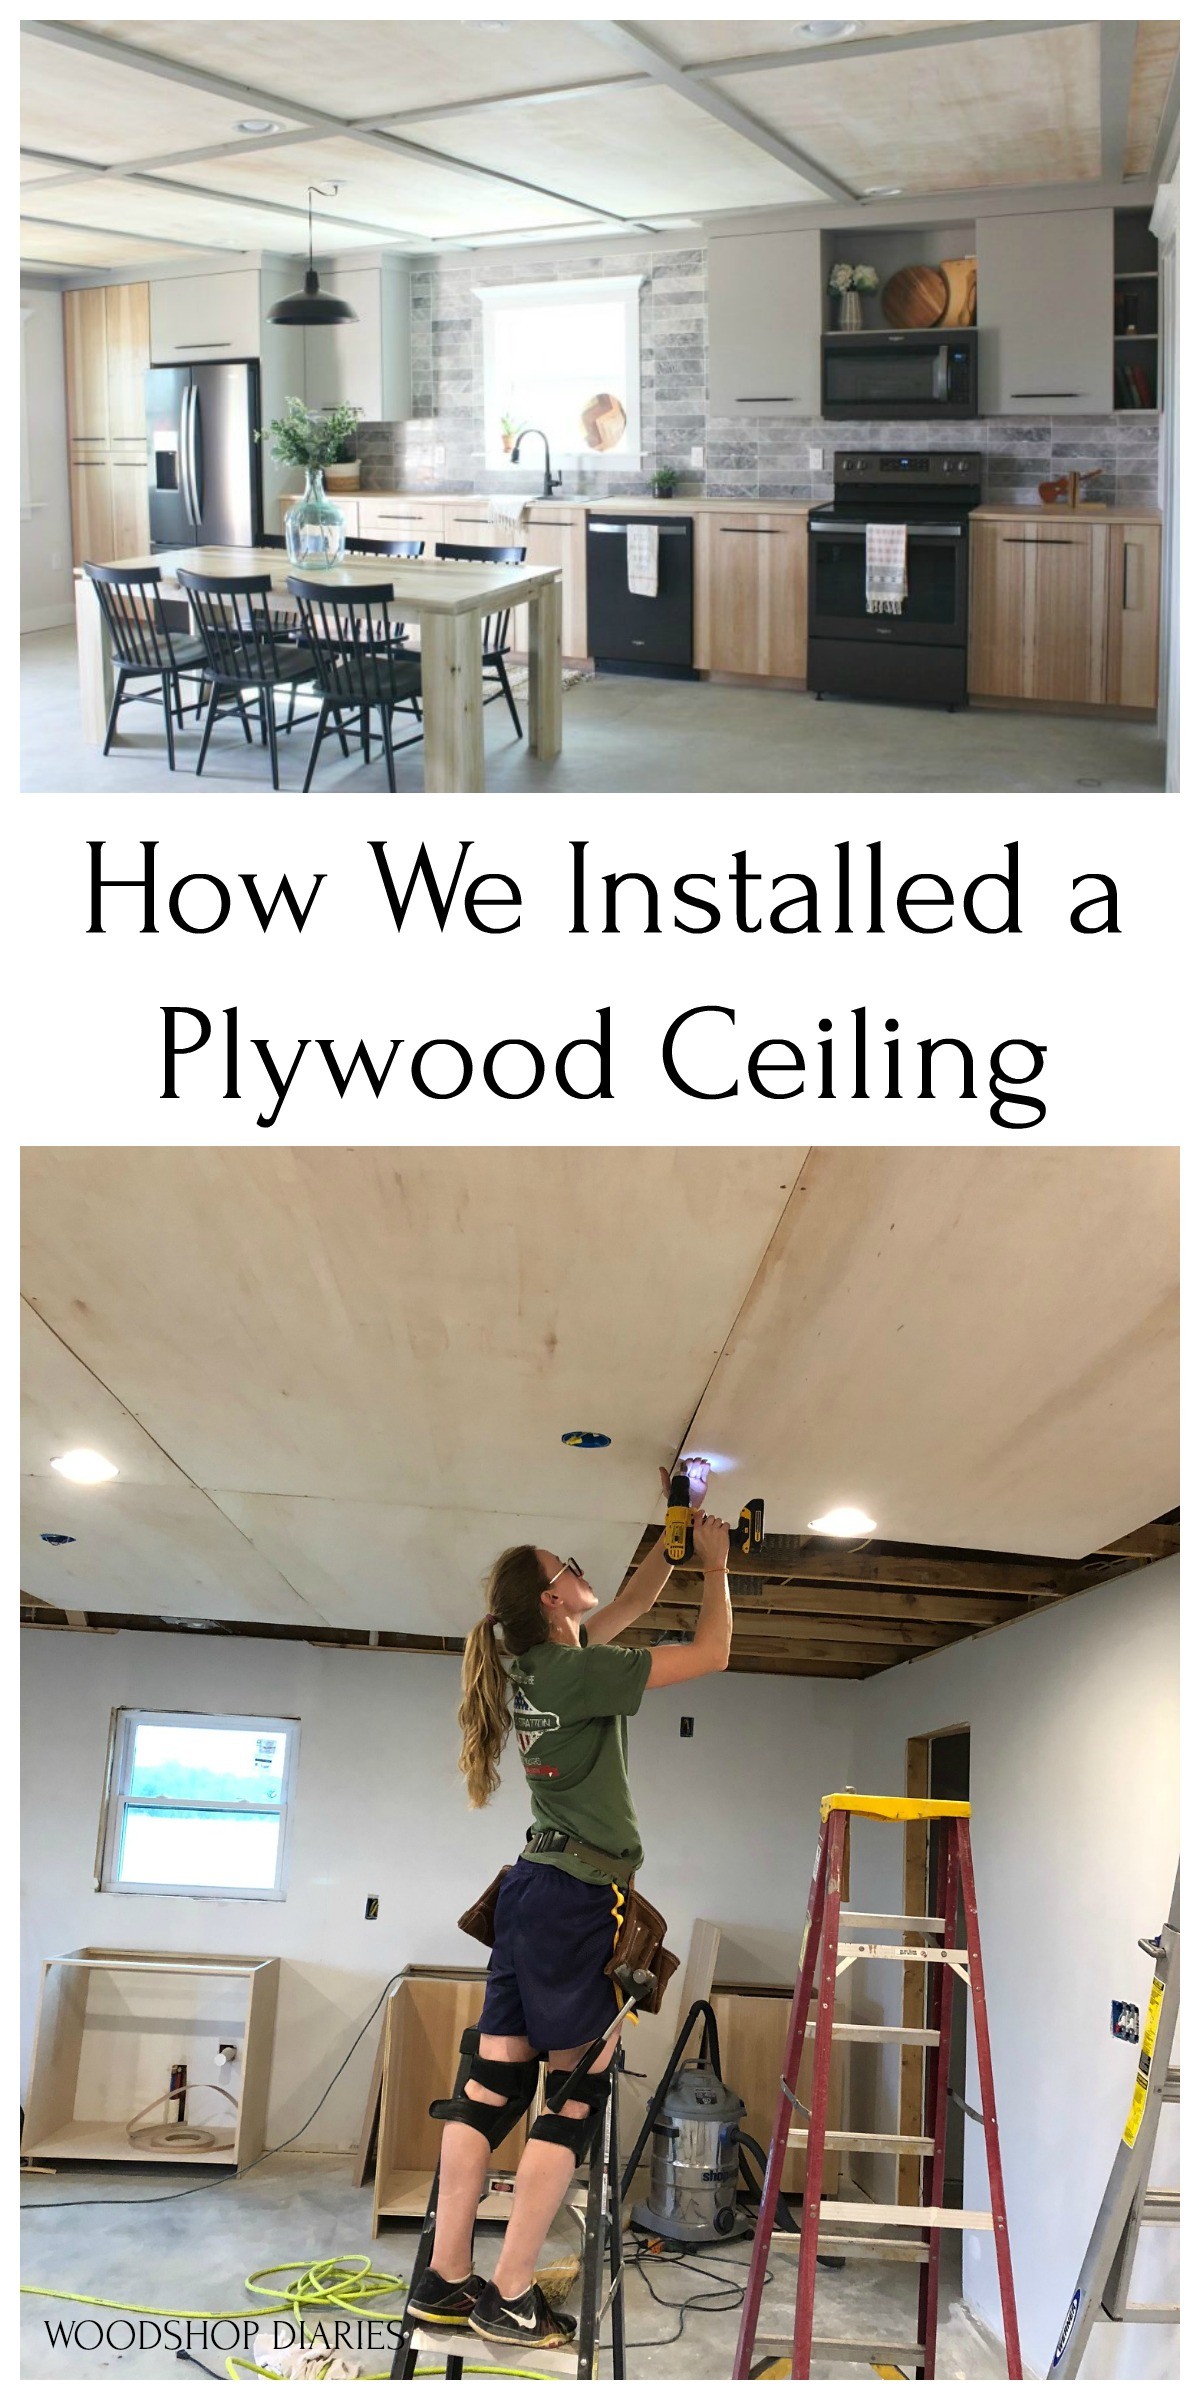 Pinterest collage of plywood ceiling in kitchen and Shara installing plywood into trusses